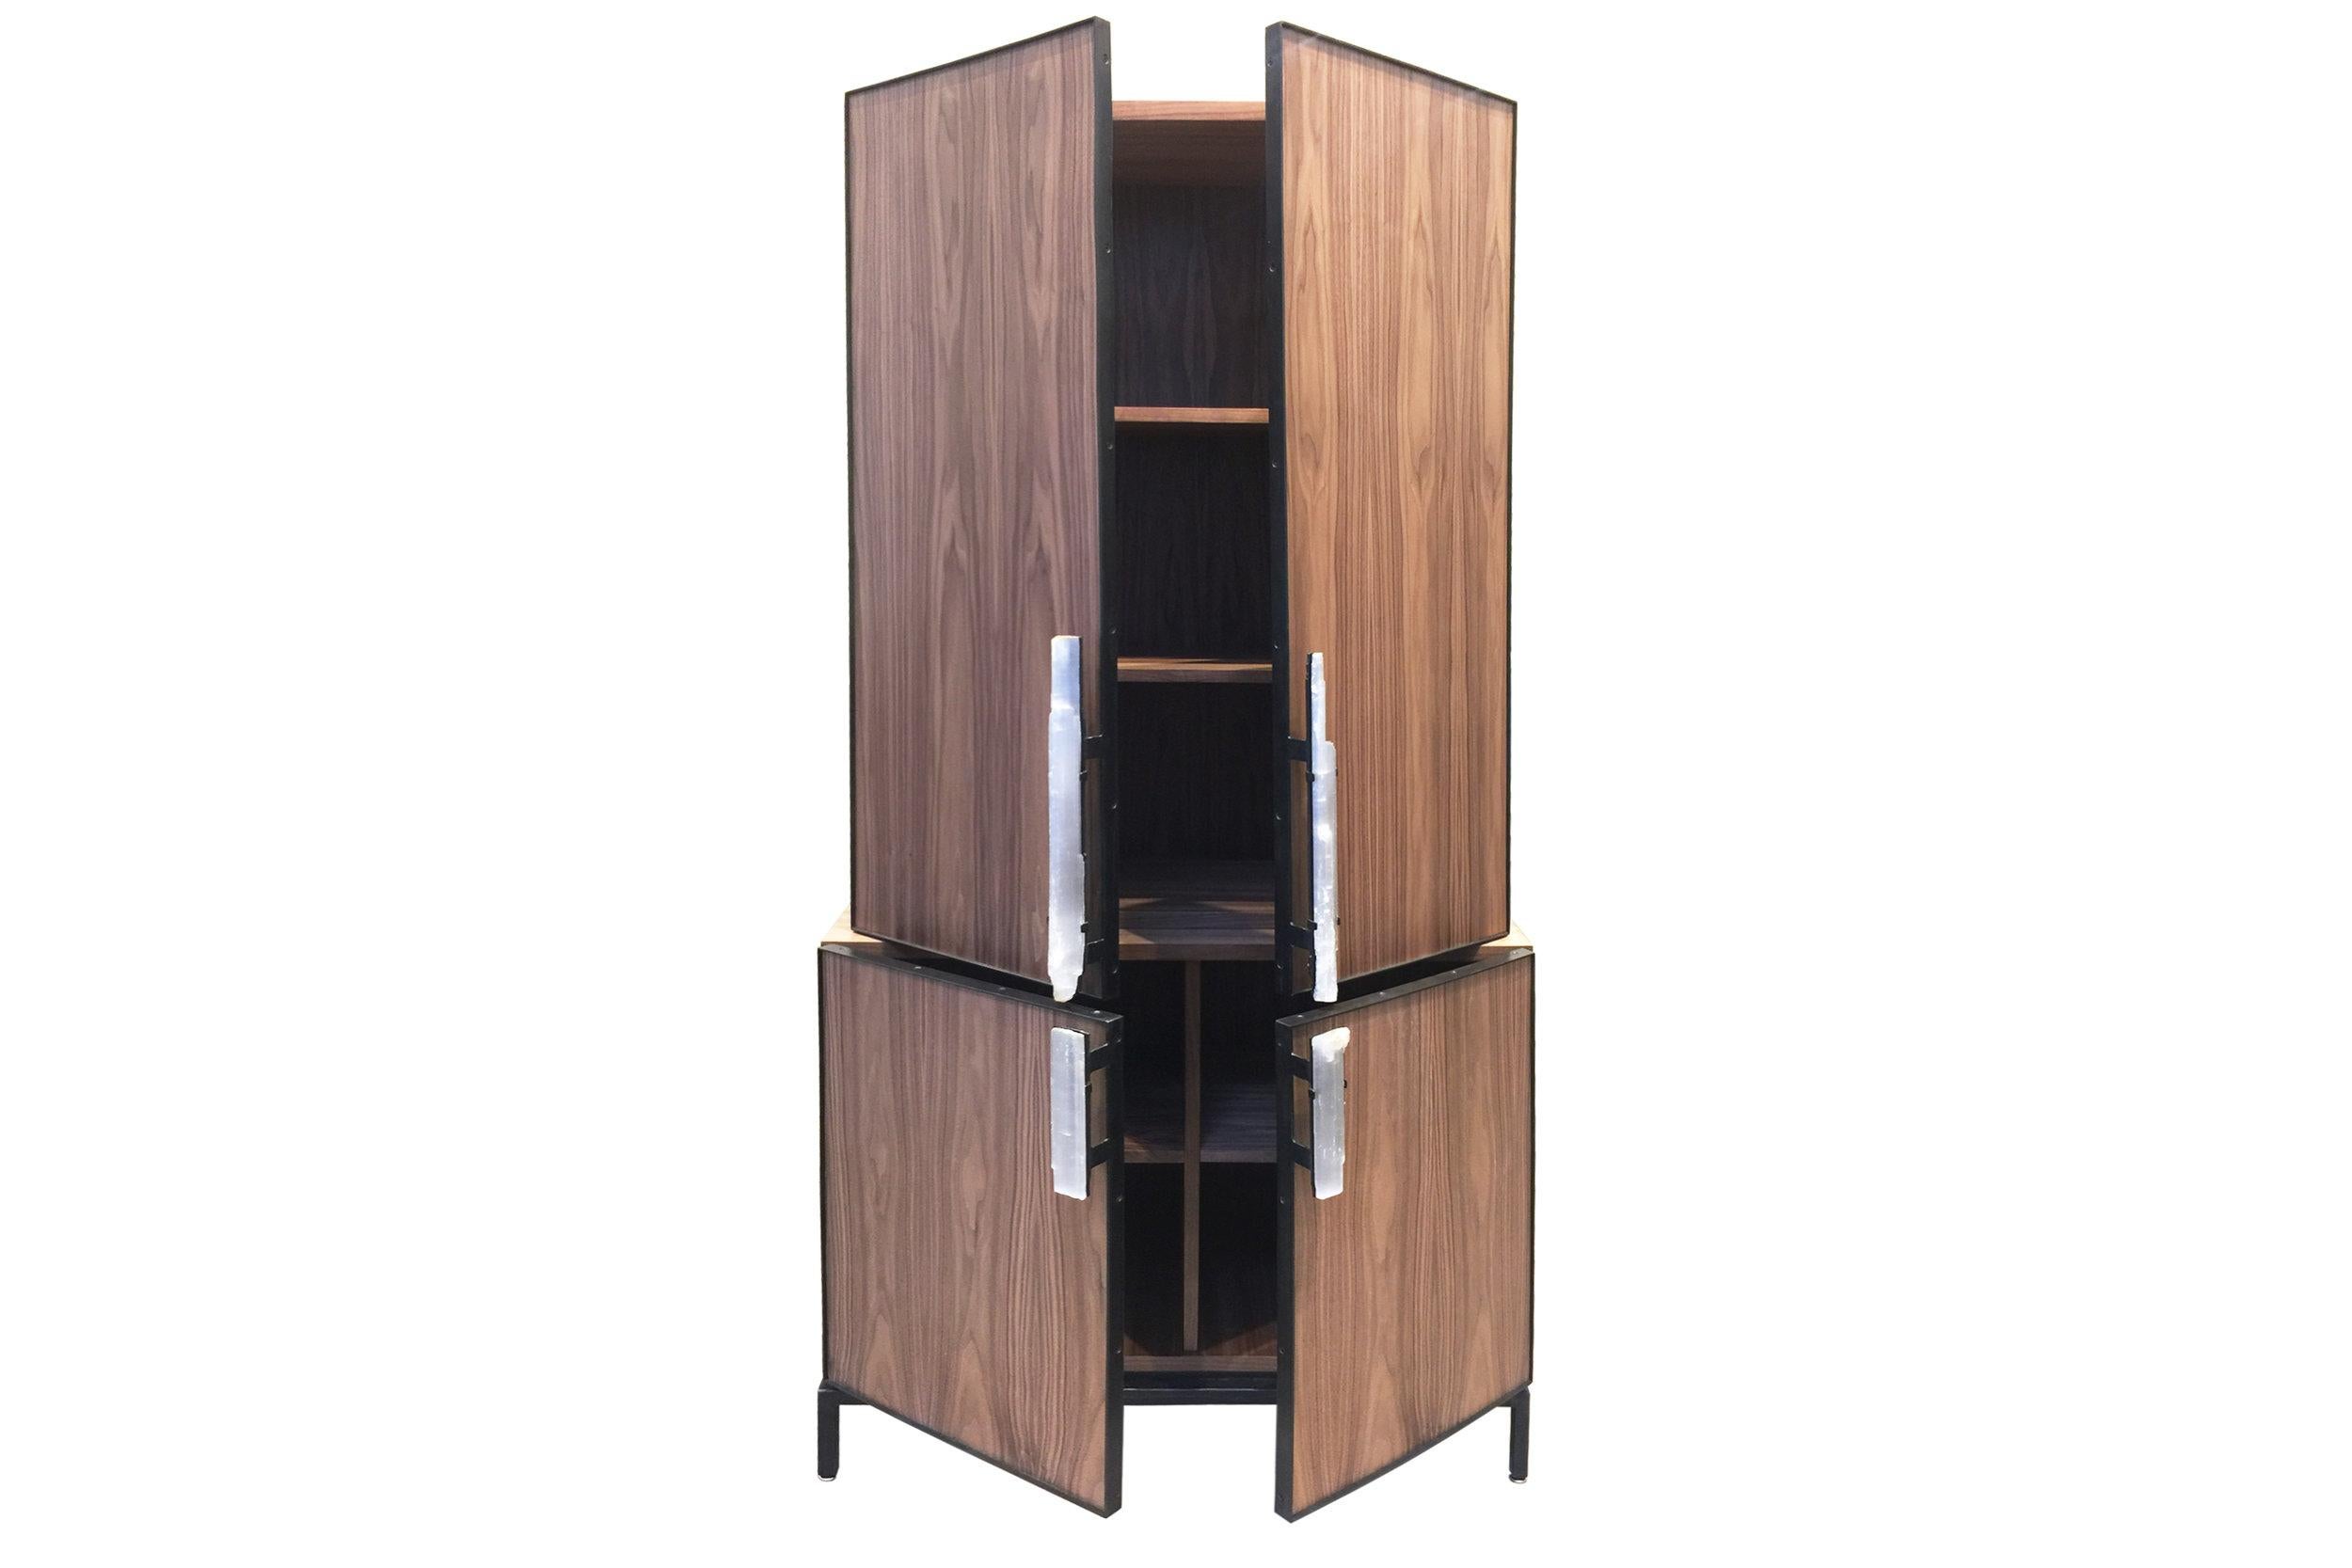 The Modern Selenite Bar Cabinet Ercole Home is crafted from Walnut with a Natural Finish, with a Natural steel base and Selenite handles. Custom sizes and finishes are available. 

Made in Brooklyn.